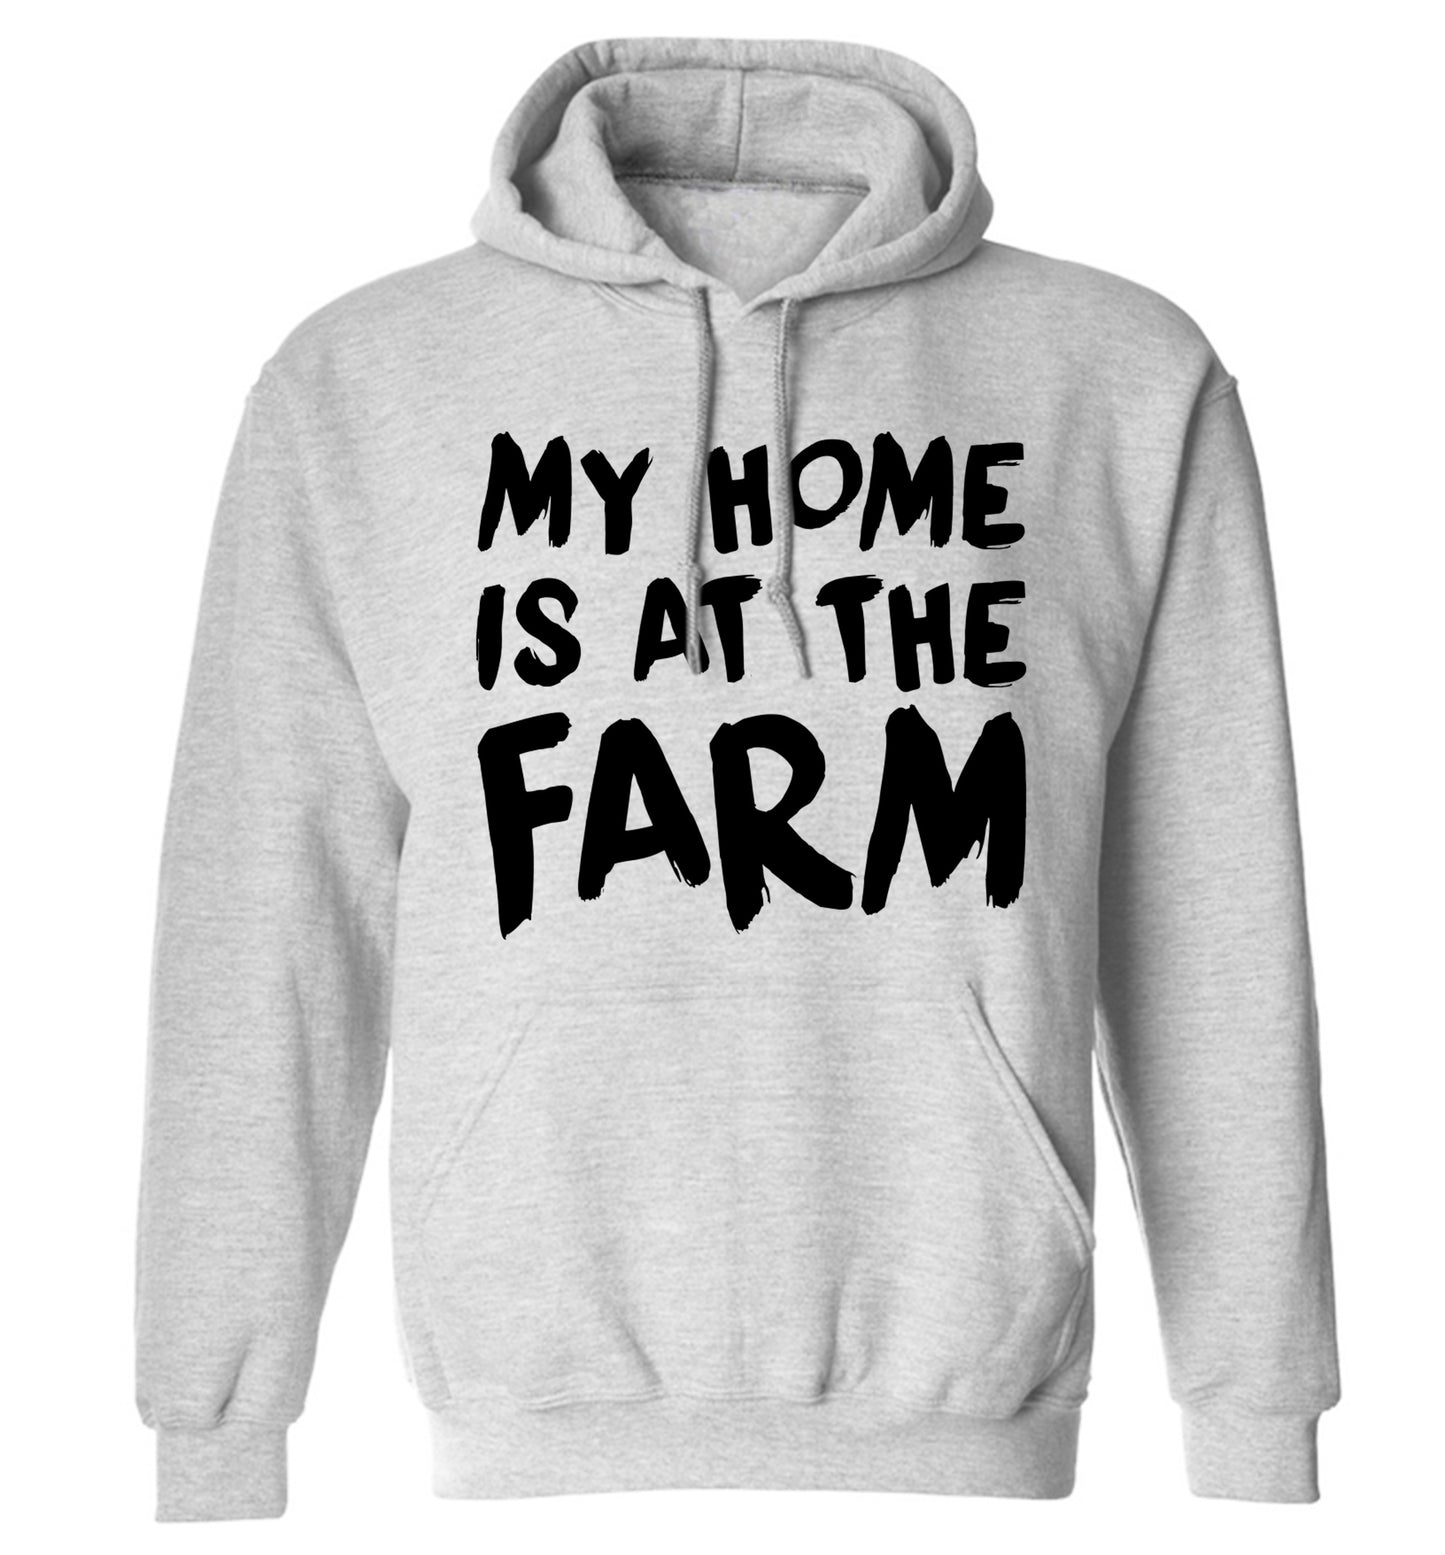 My home is at the farm adults unisex grey hoodie 2XL